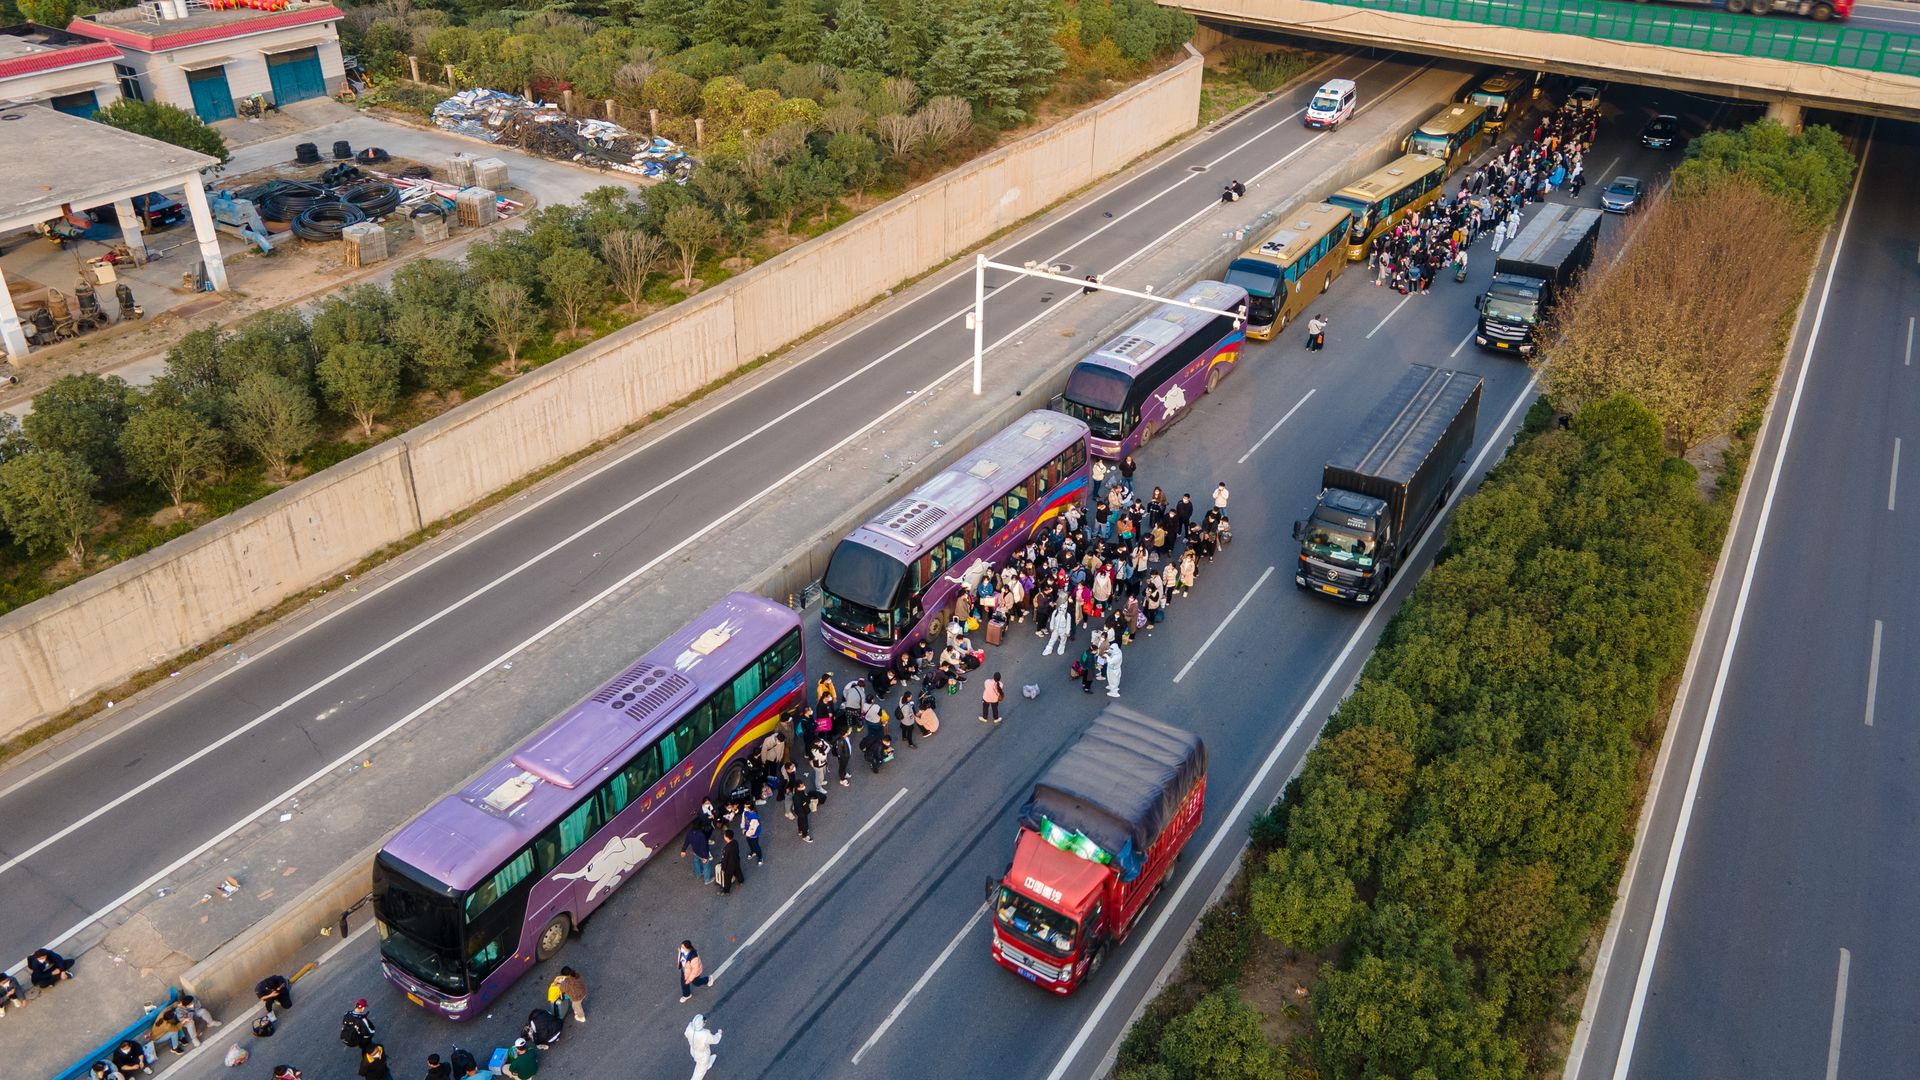 Foxconn employees take shuttle buses to head home on October 30, 2022 in Zhengzhou, Henan Province of China